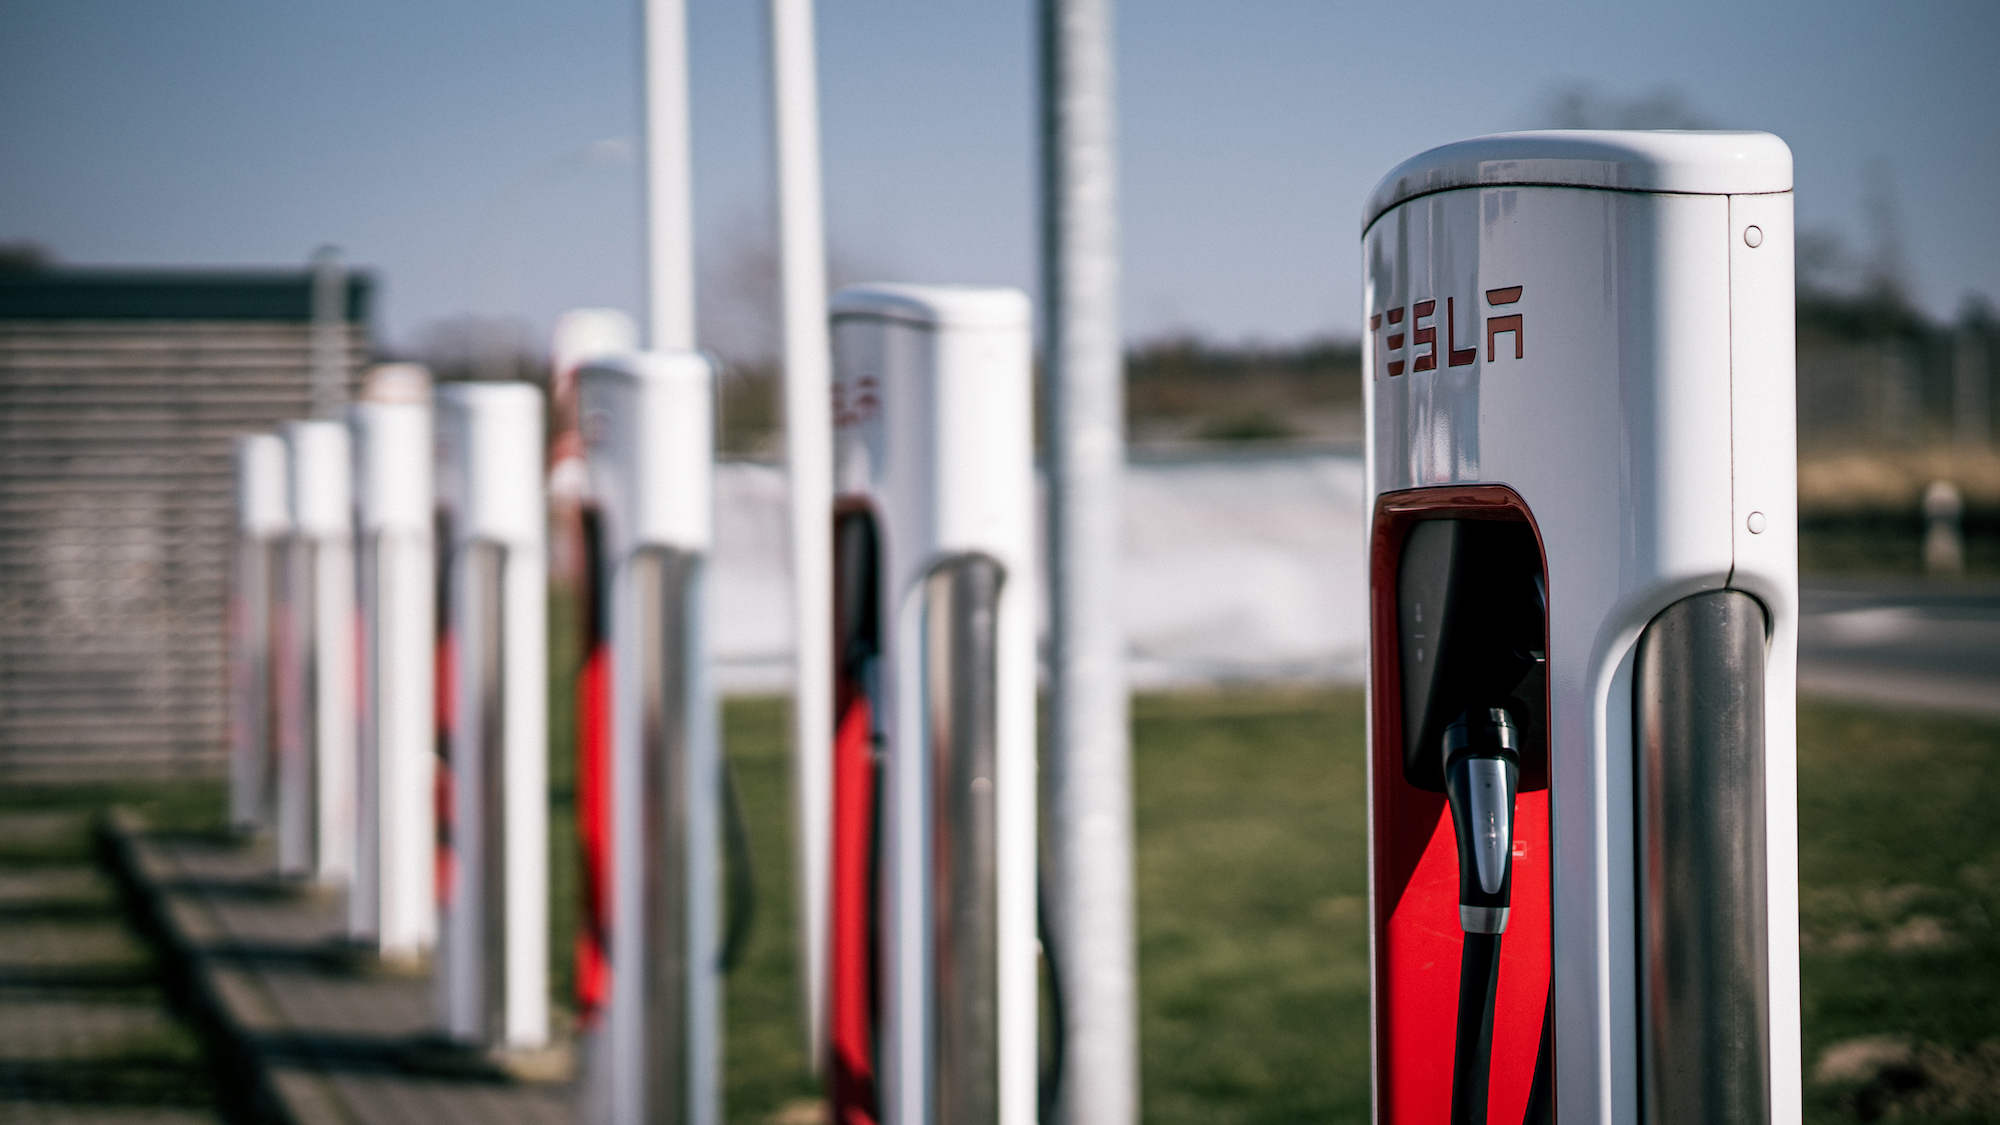 A row of Tesla charging stations is shown.